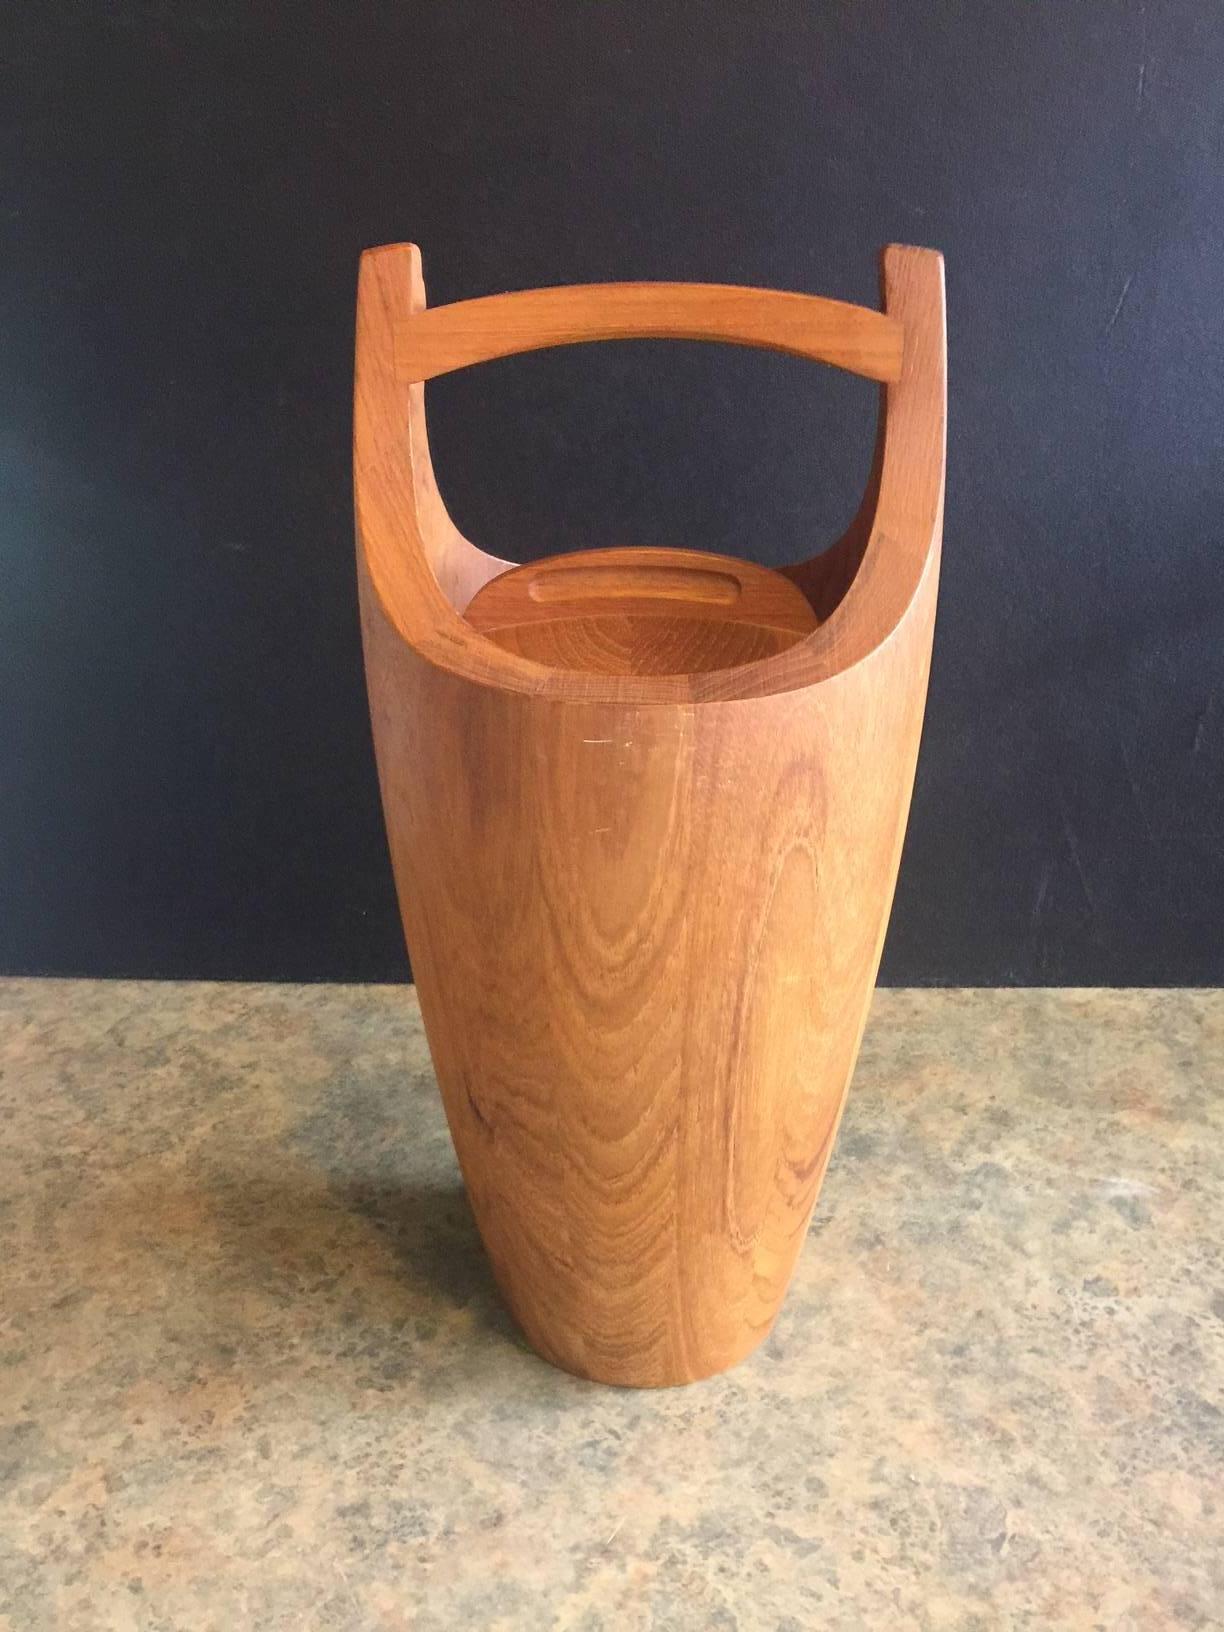 A very nice midcentury staved teak ice bucket by Jens Quistgaard for Dansk, circa 1960s. The iconic piece, which is part of the permanent collection of MoMA, is in excellent condition and recently reconditioned and oiled.